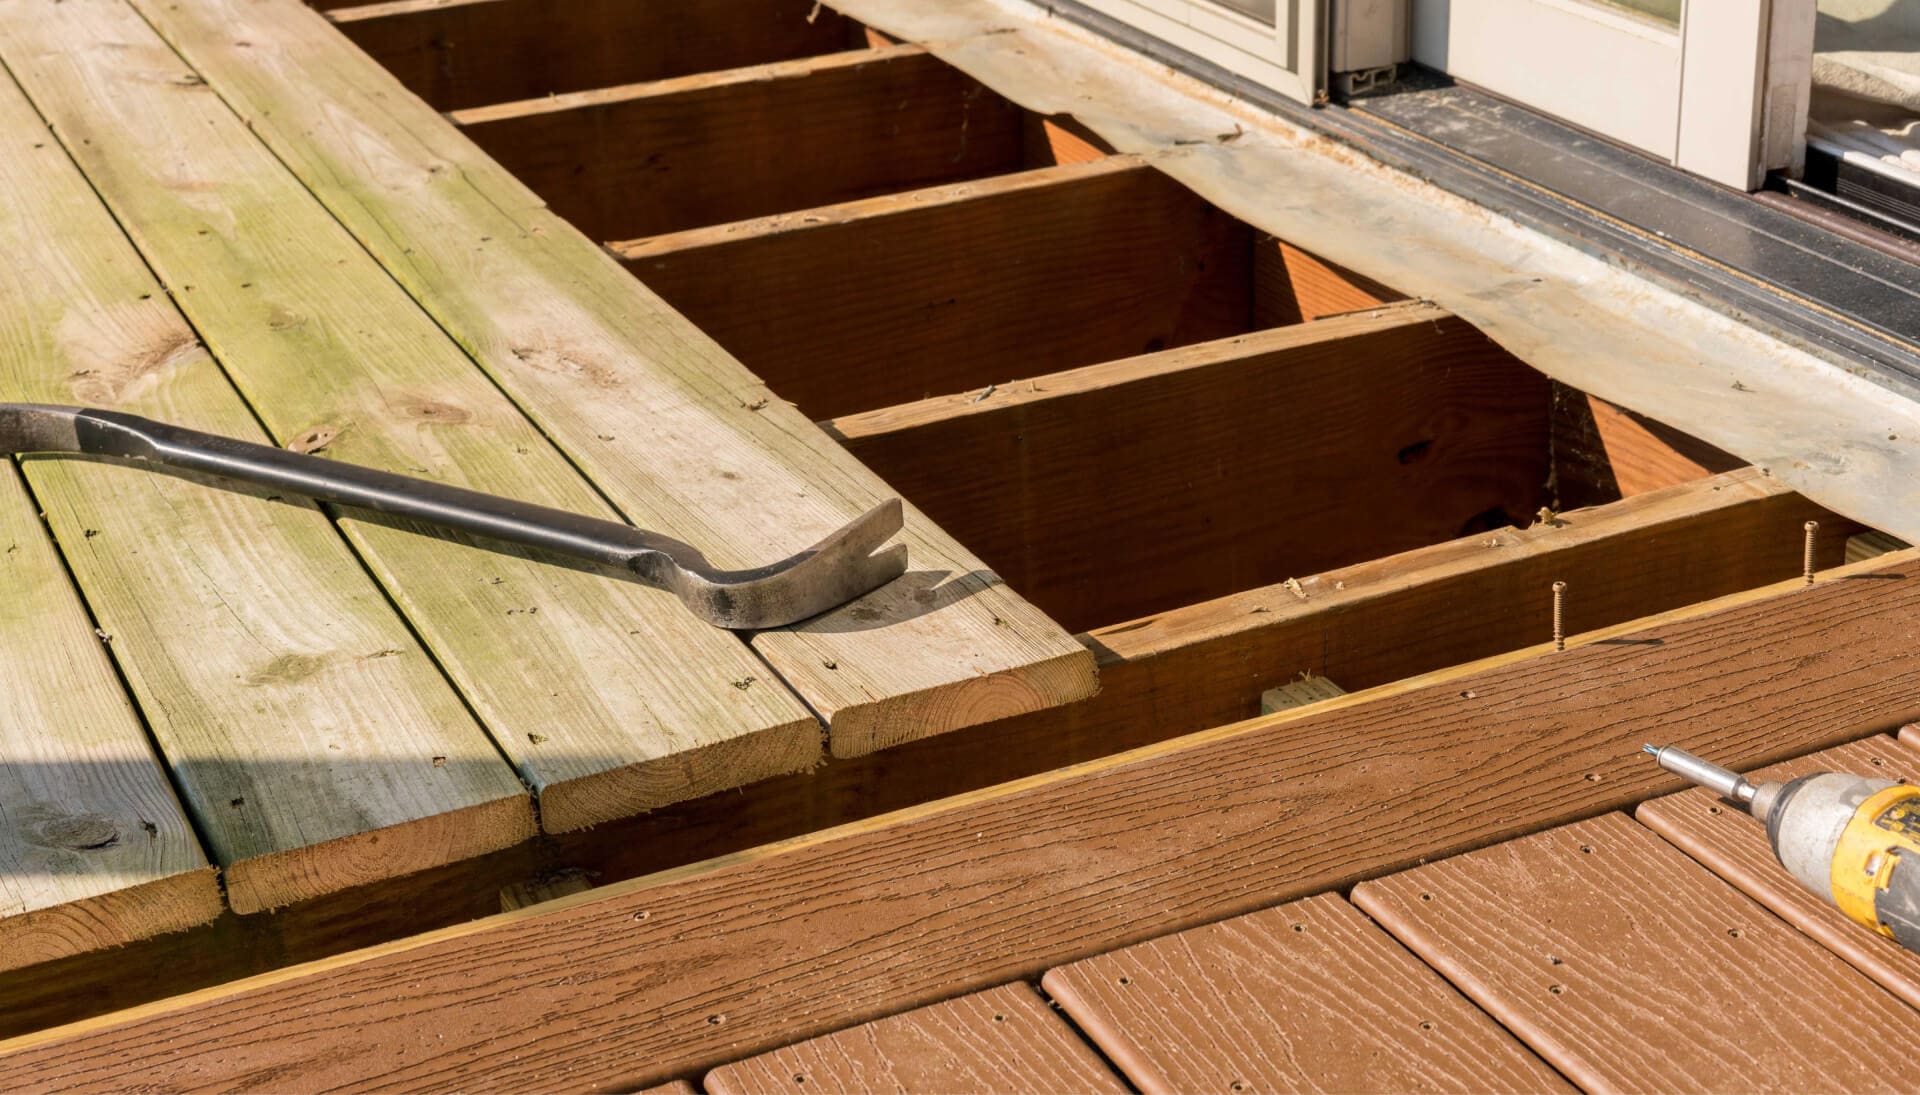 A professional deck repair service in Pittsburgh, providing thorough inspections and maintenance to ensure the safety and durability of the structure